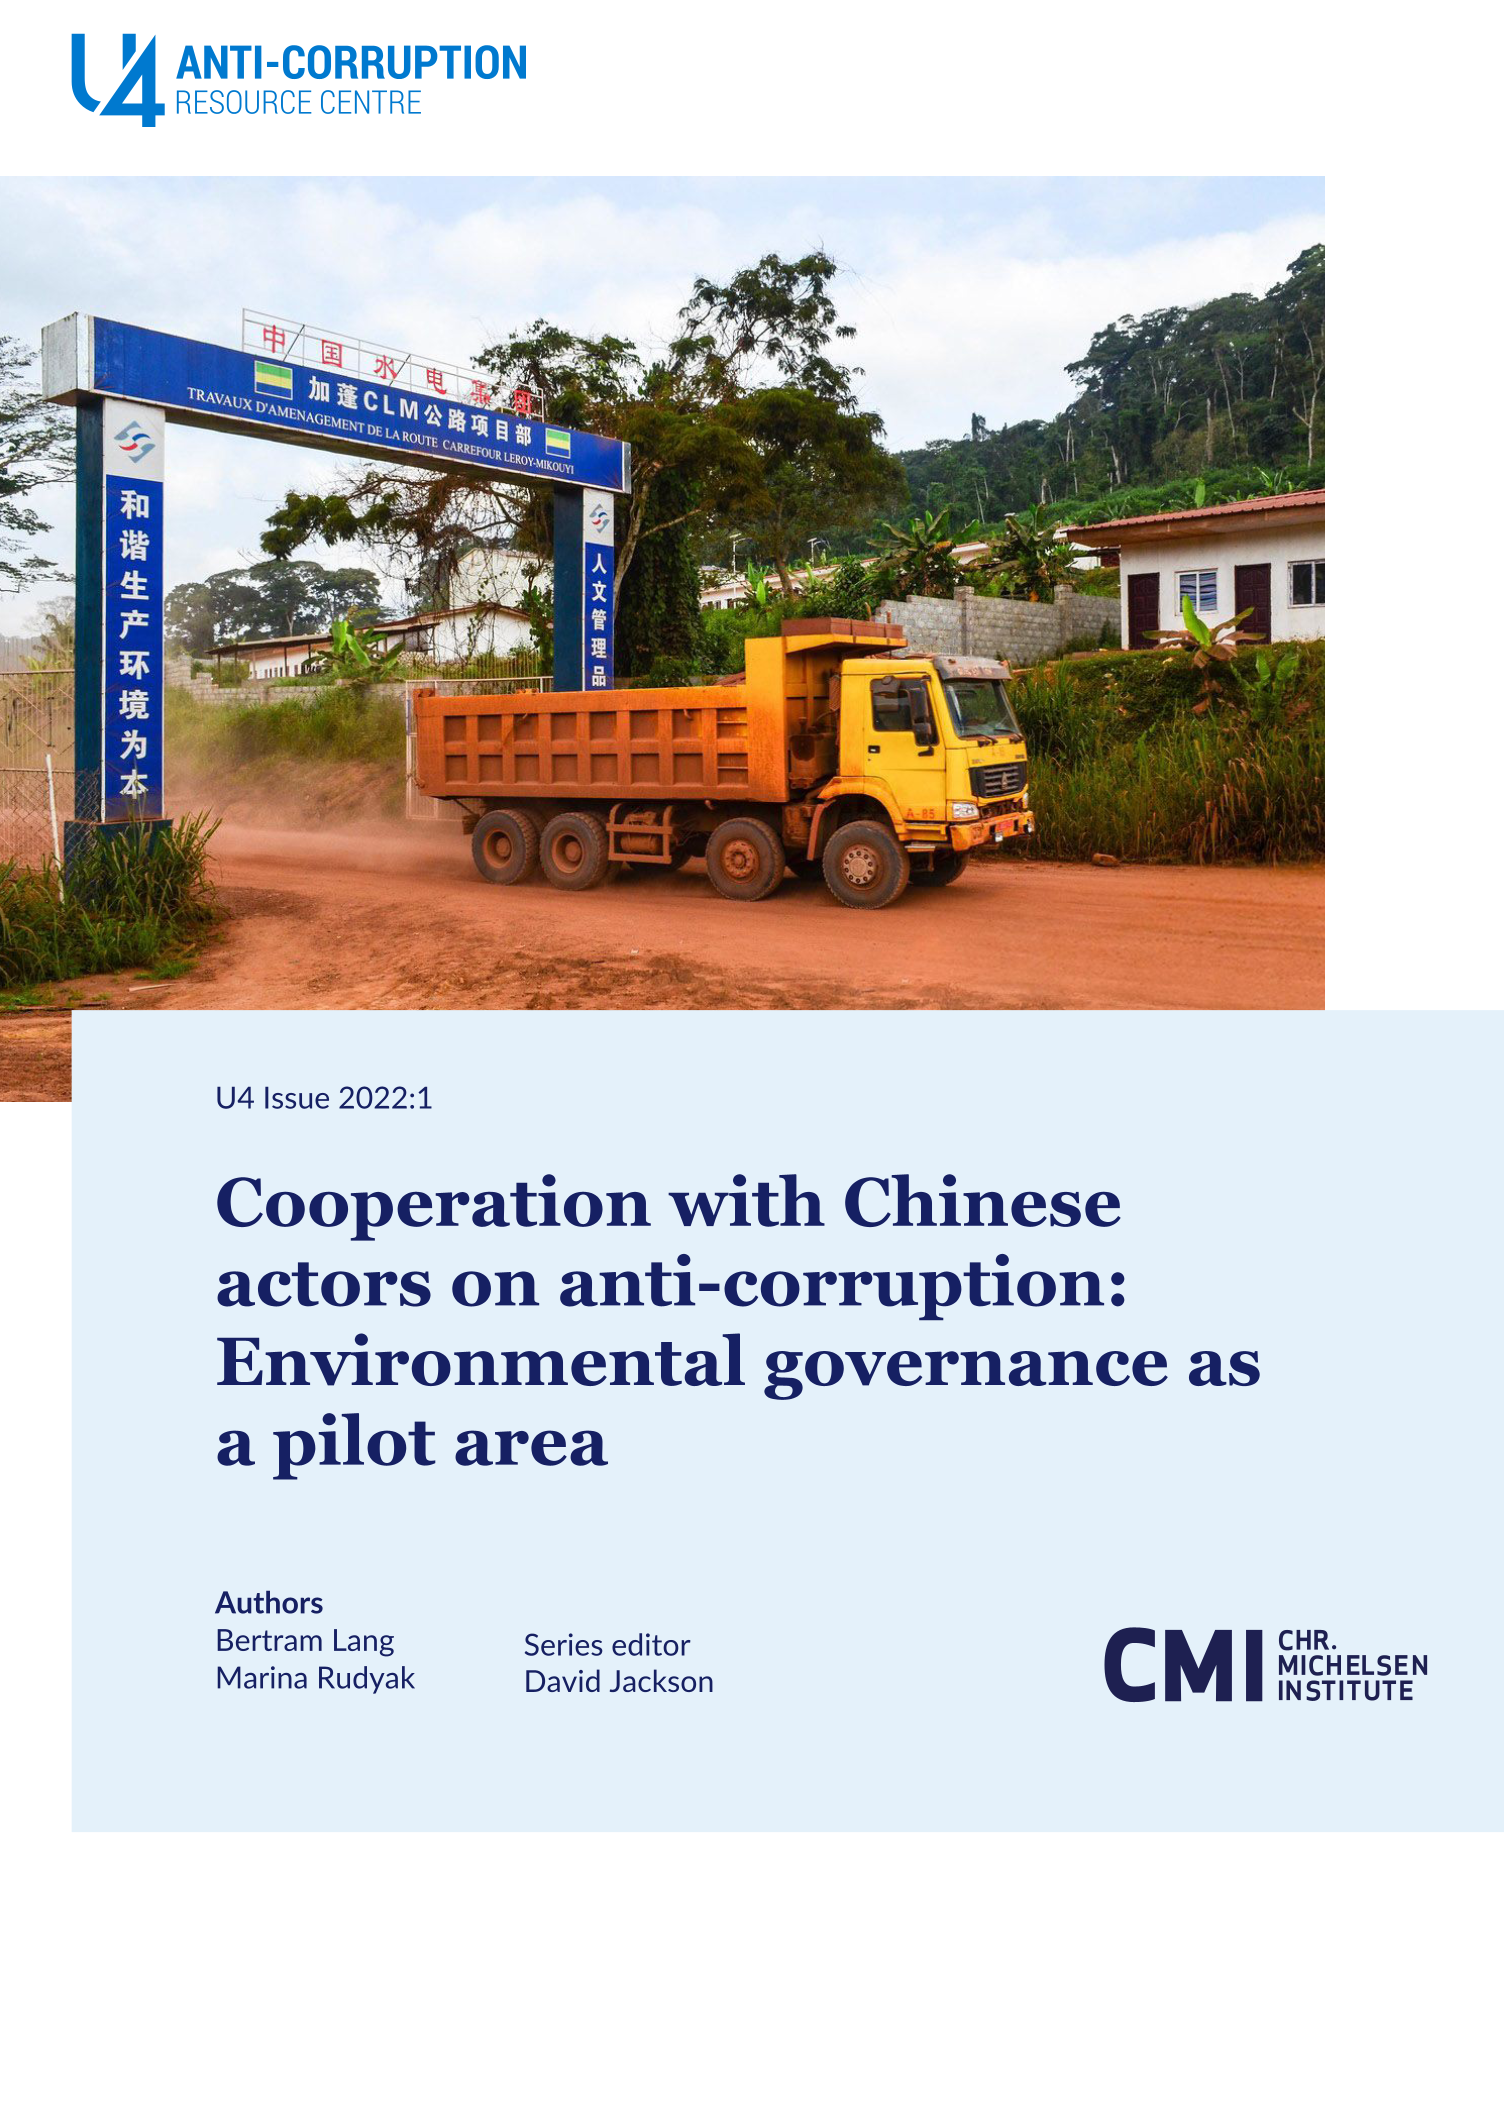 Cooperation with Chinese actors on anti-corruption: Environmental governance as a pilot area